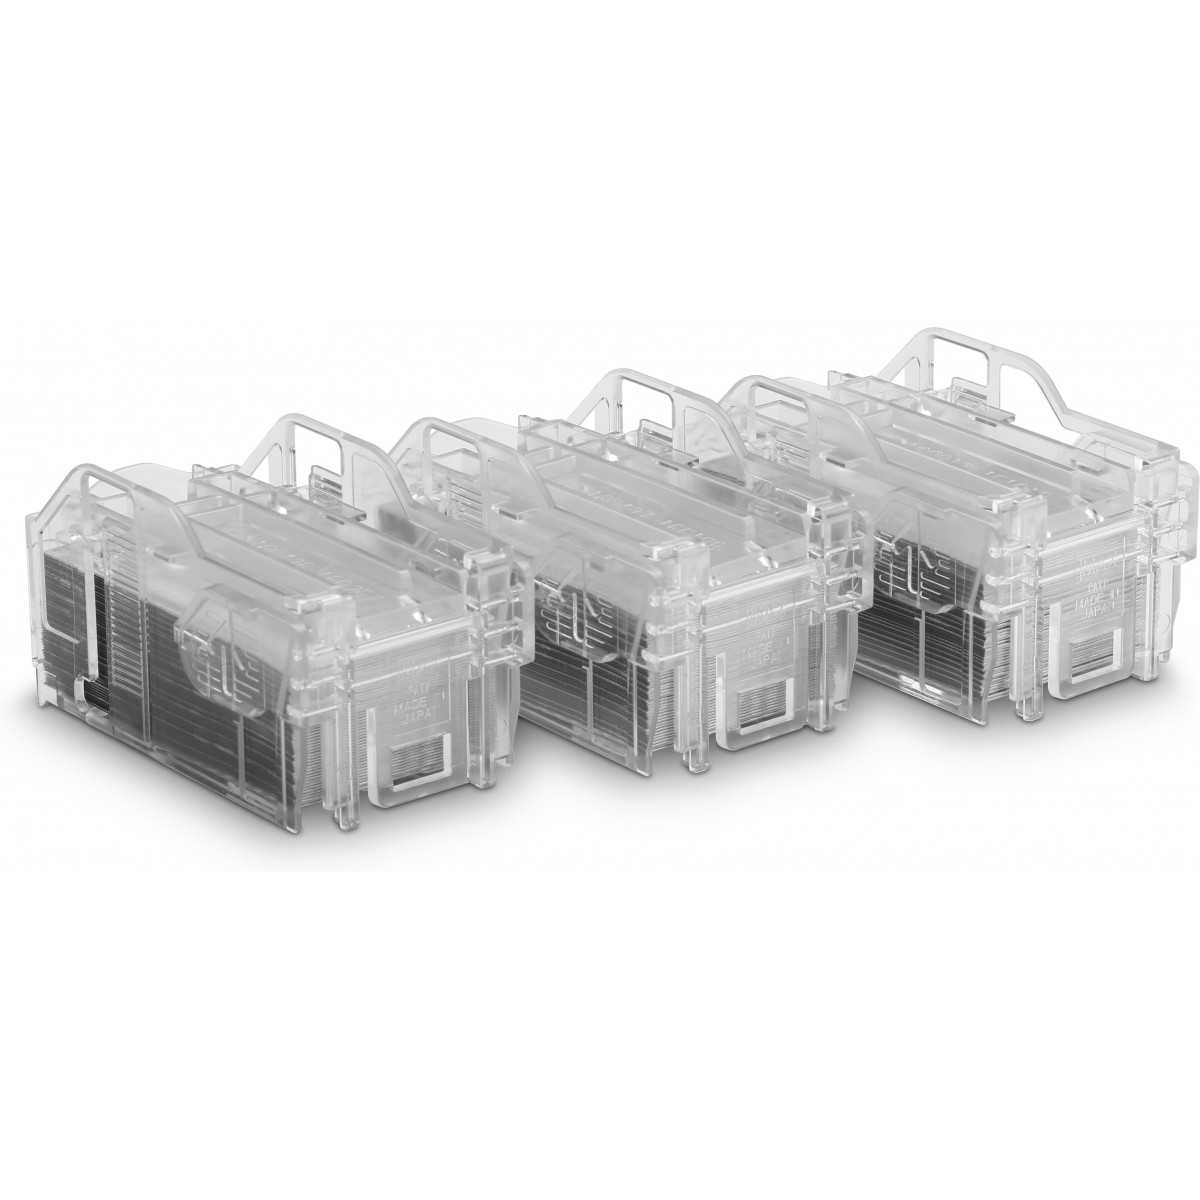 HP Y1G13A - 5000 staples - HP - LaserJet Managed MFP E72425 - MFP E72530 - MFP E72535 - MFP E82540du - MFP E82550du - MFP E82560